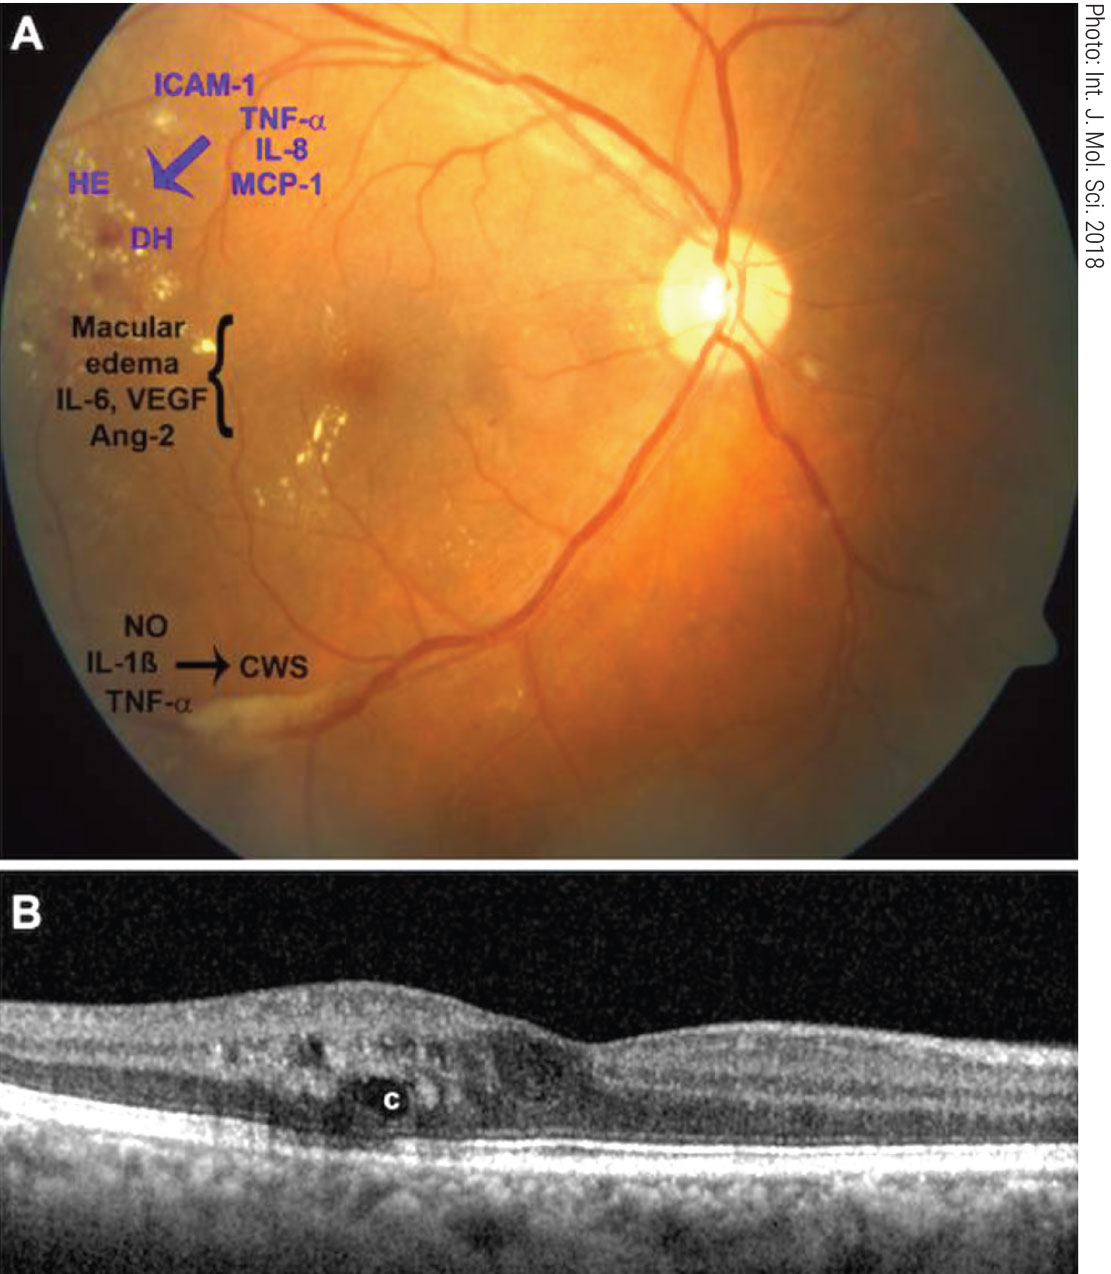 Fig. 4. Interferon retinopathy clinical appearance and pro-inflammatory cytokines (A). Exudates and cystic edema on OCT (B).